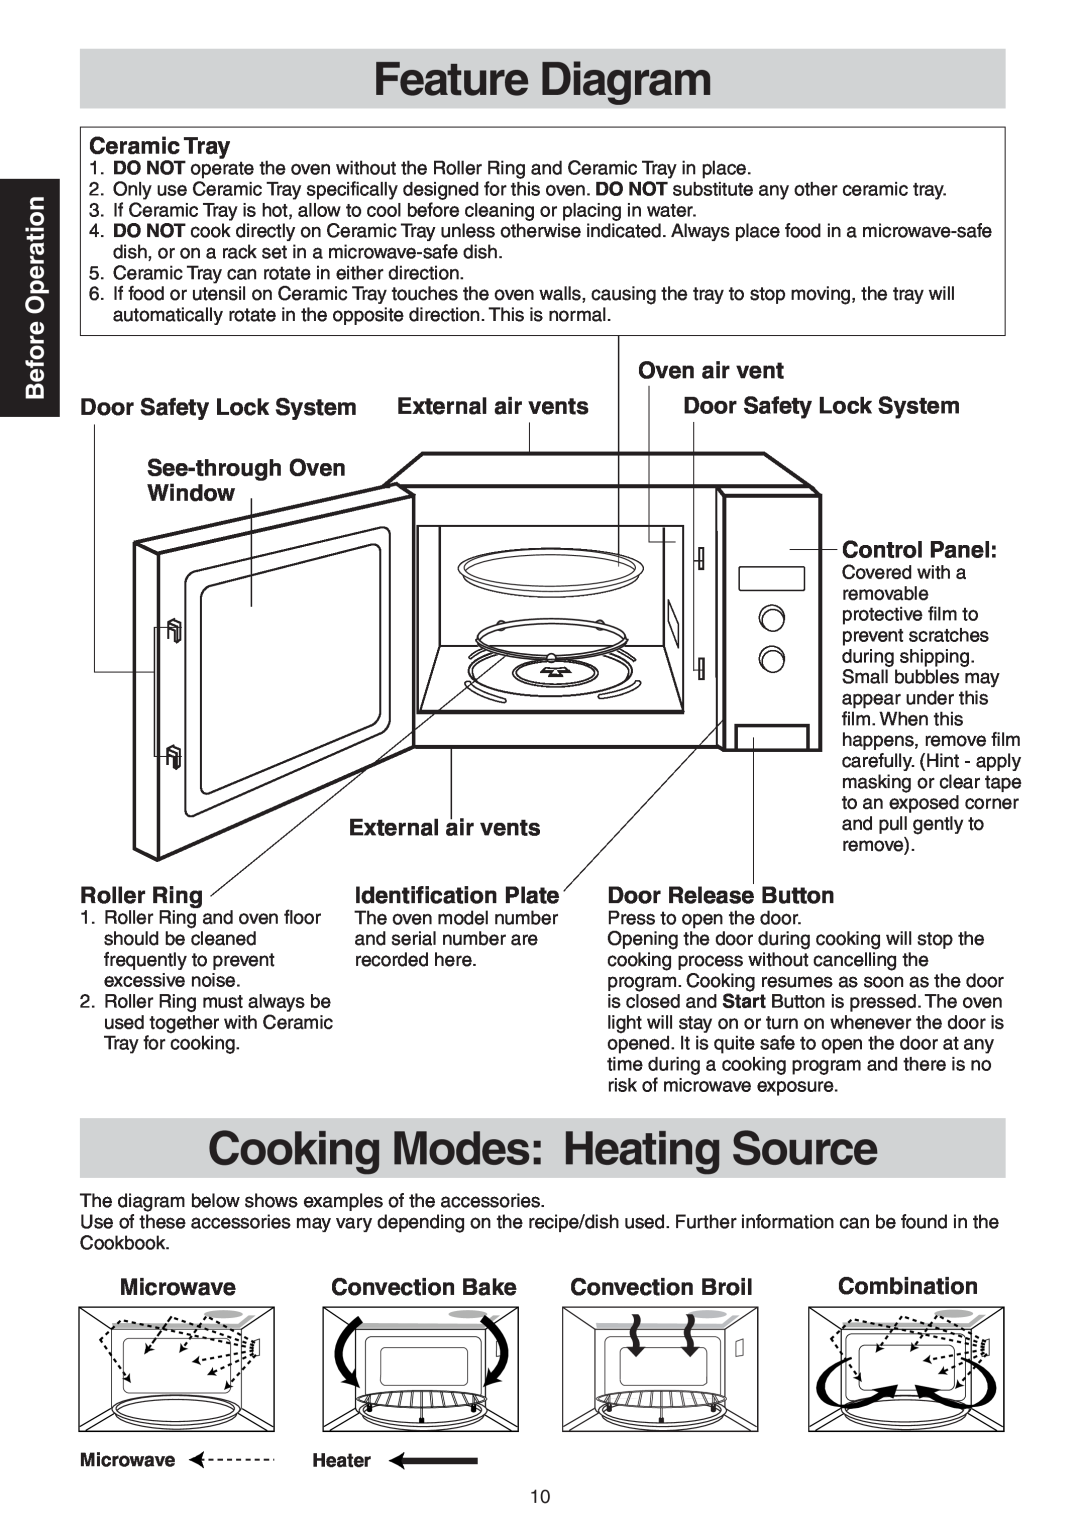 Panasonic NN-CD989S manual Feature Diagram, Cooking Modes Heating Source, Operation, Before 